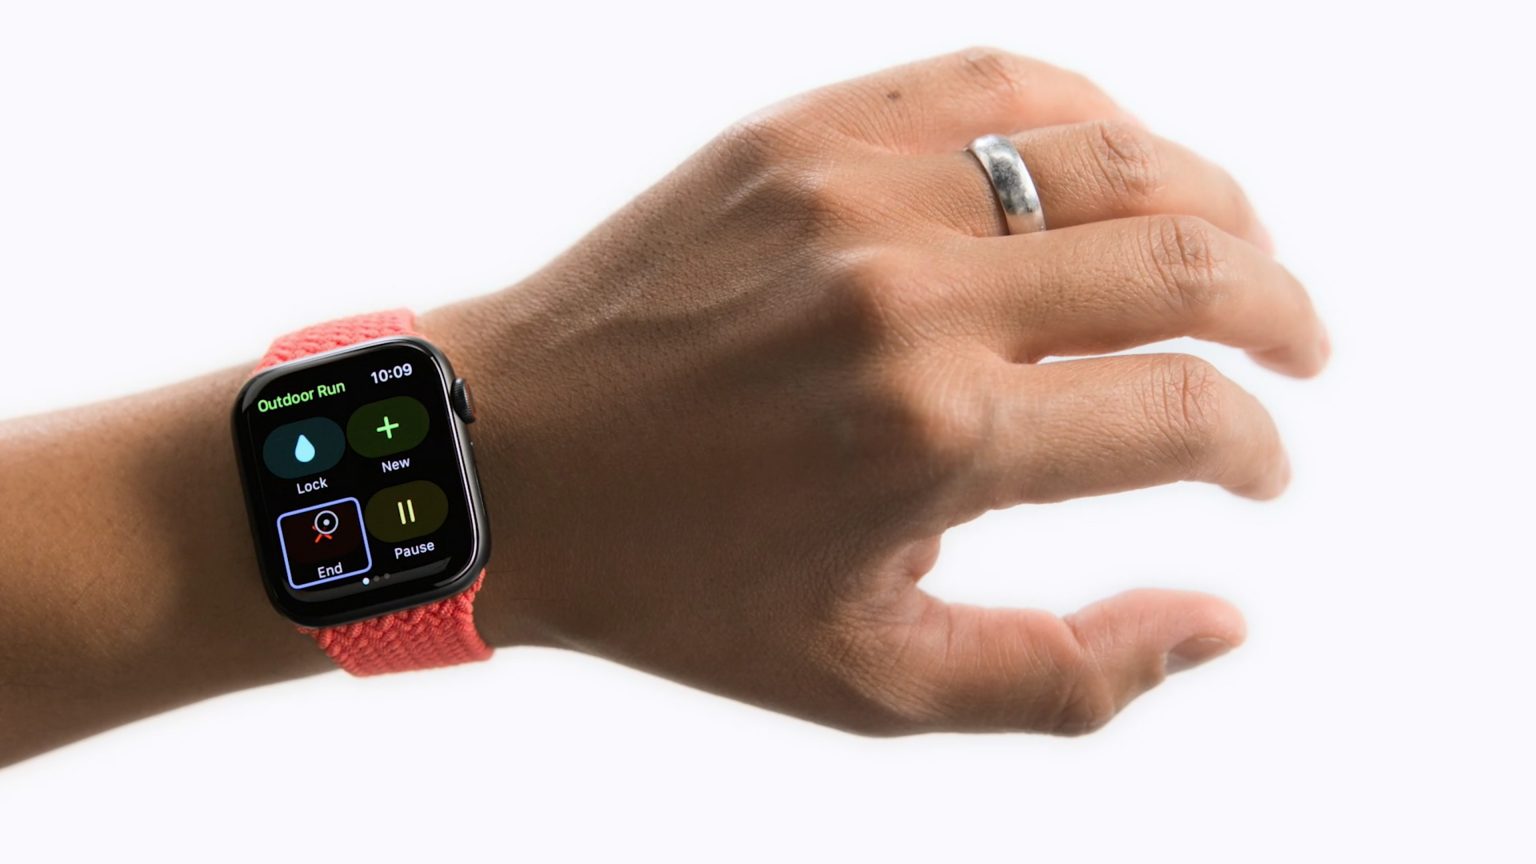 AssistiveTouch lets users control Apple Watch by clenching their fists.